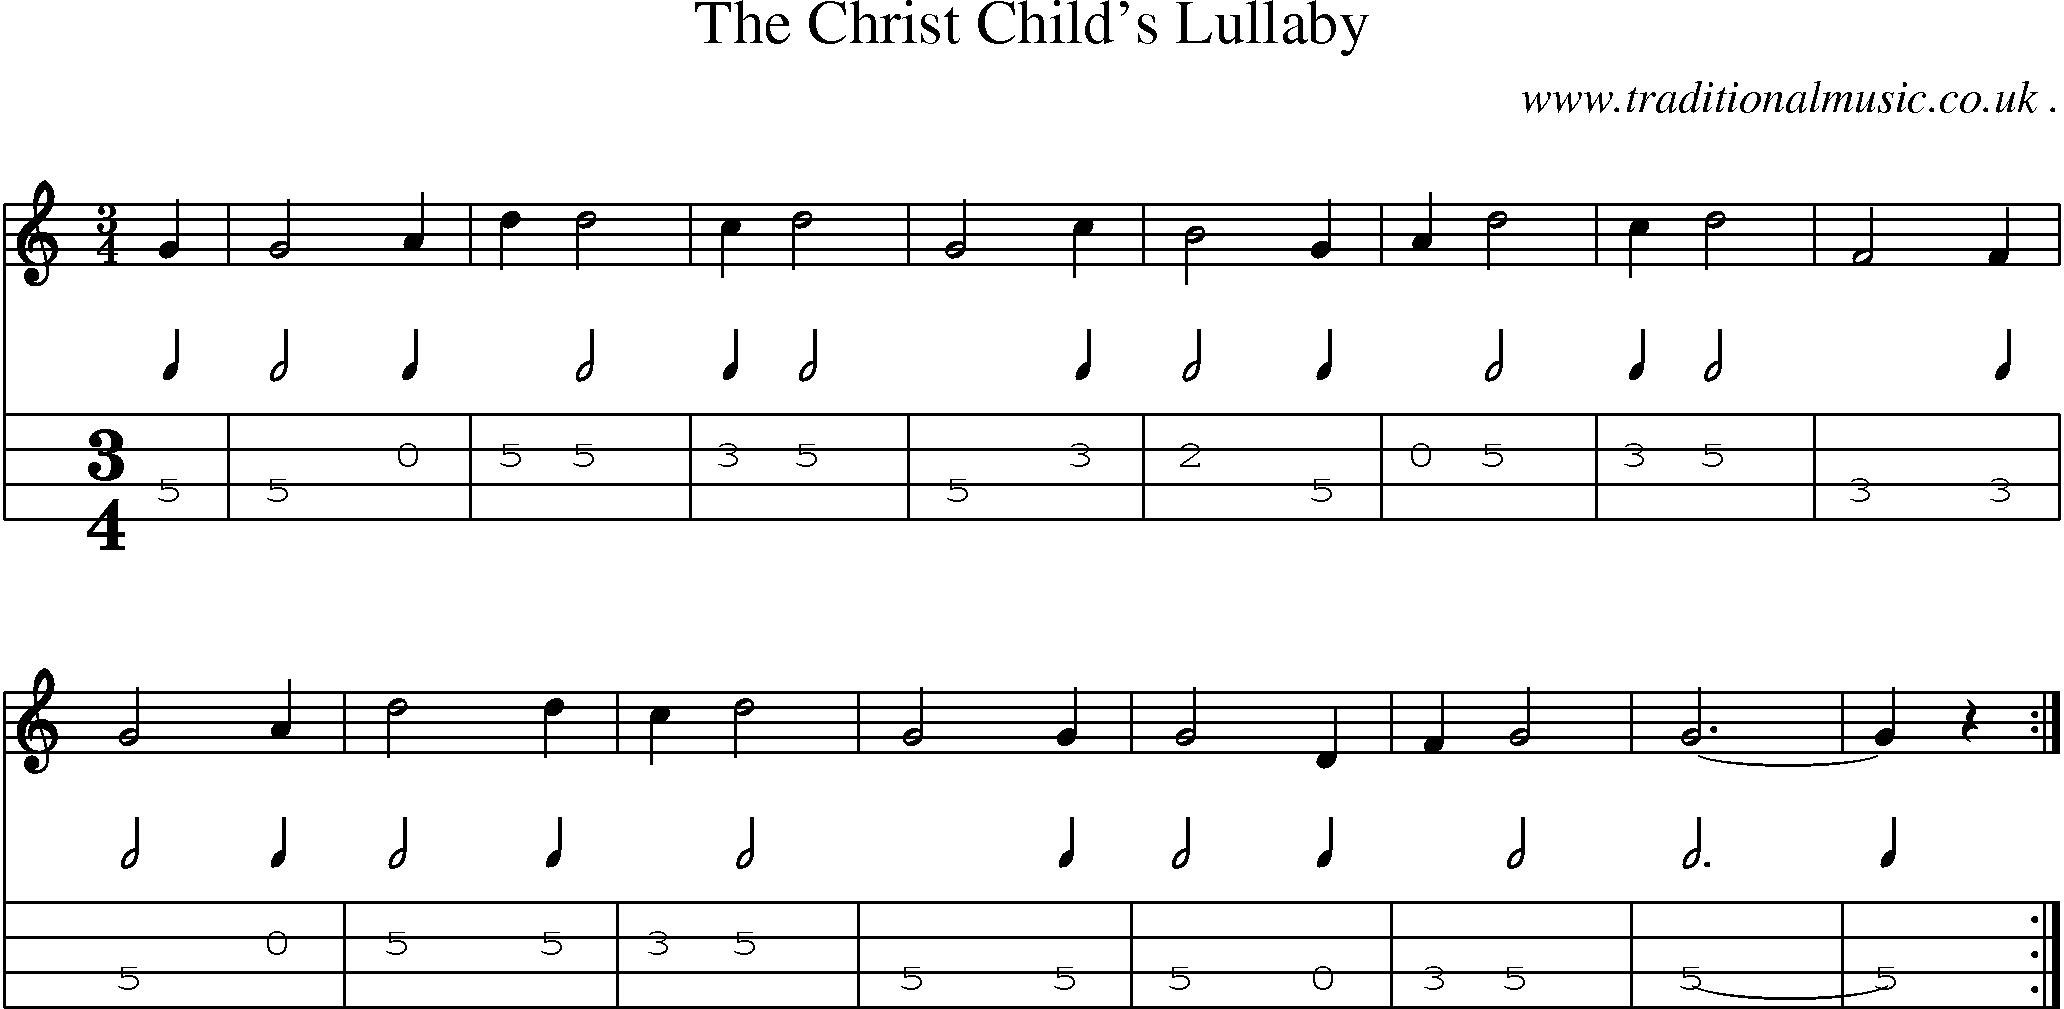 Sheet-music  score, Chords and Mandolin Tabs for The Christ Childs Lullaby